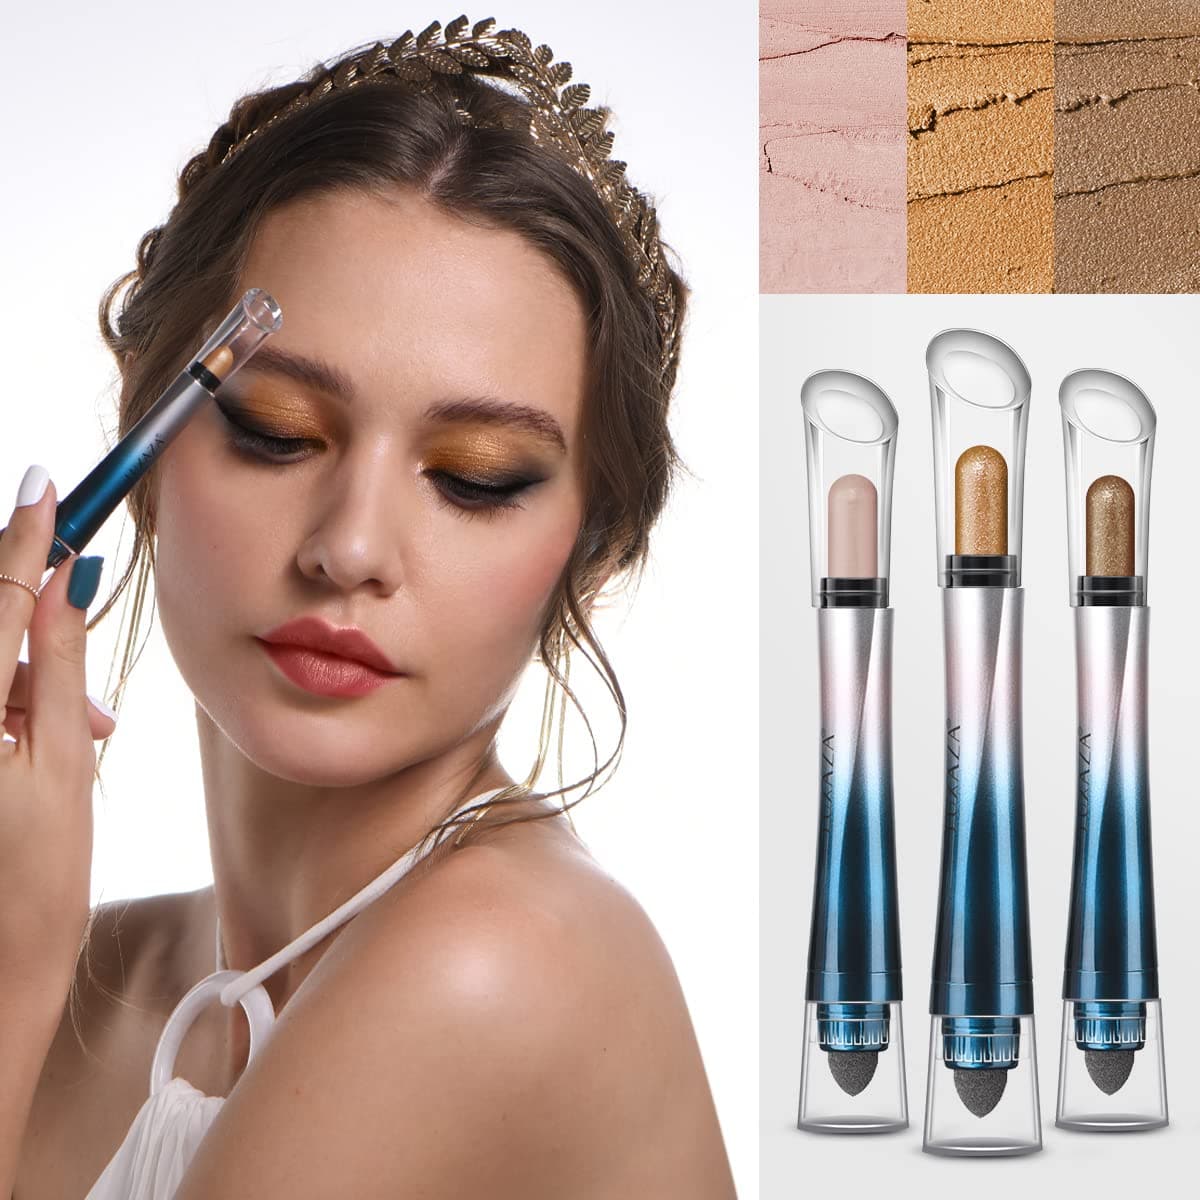 LUXAZA Goddess Sceptre Eyeshadow Stick(6pcs)-Brown Nude【US ONLY】